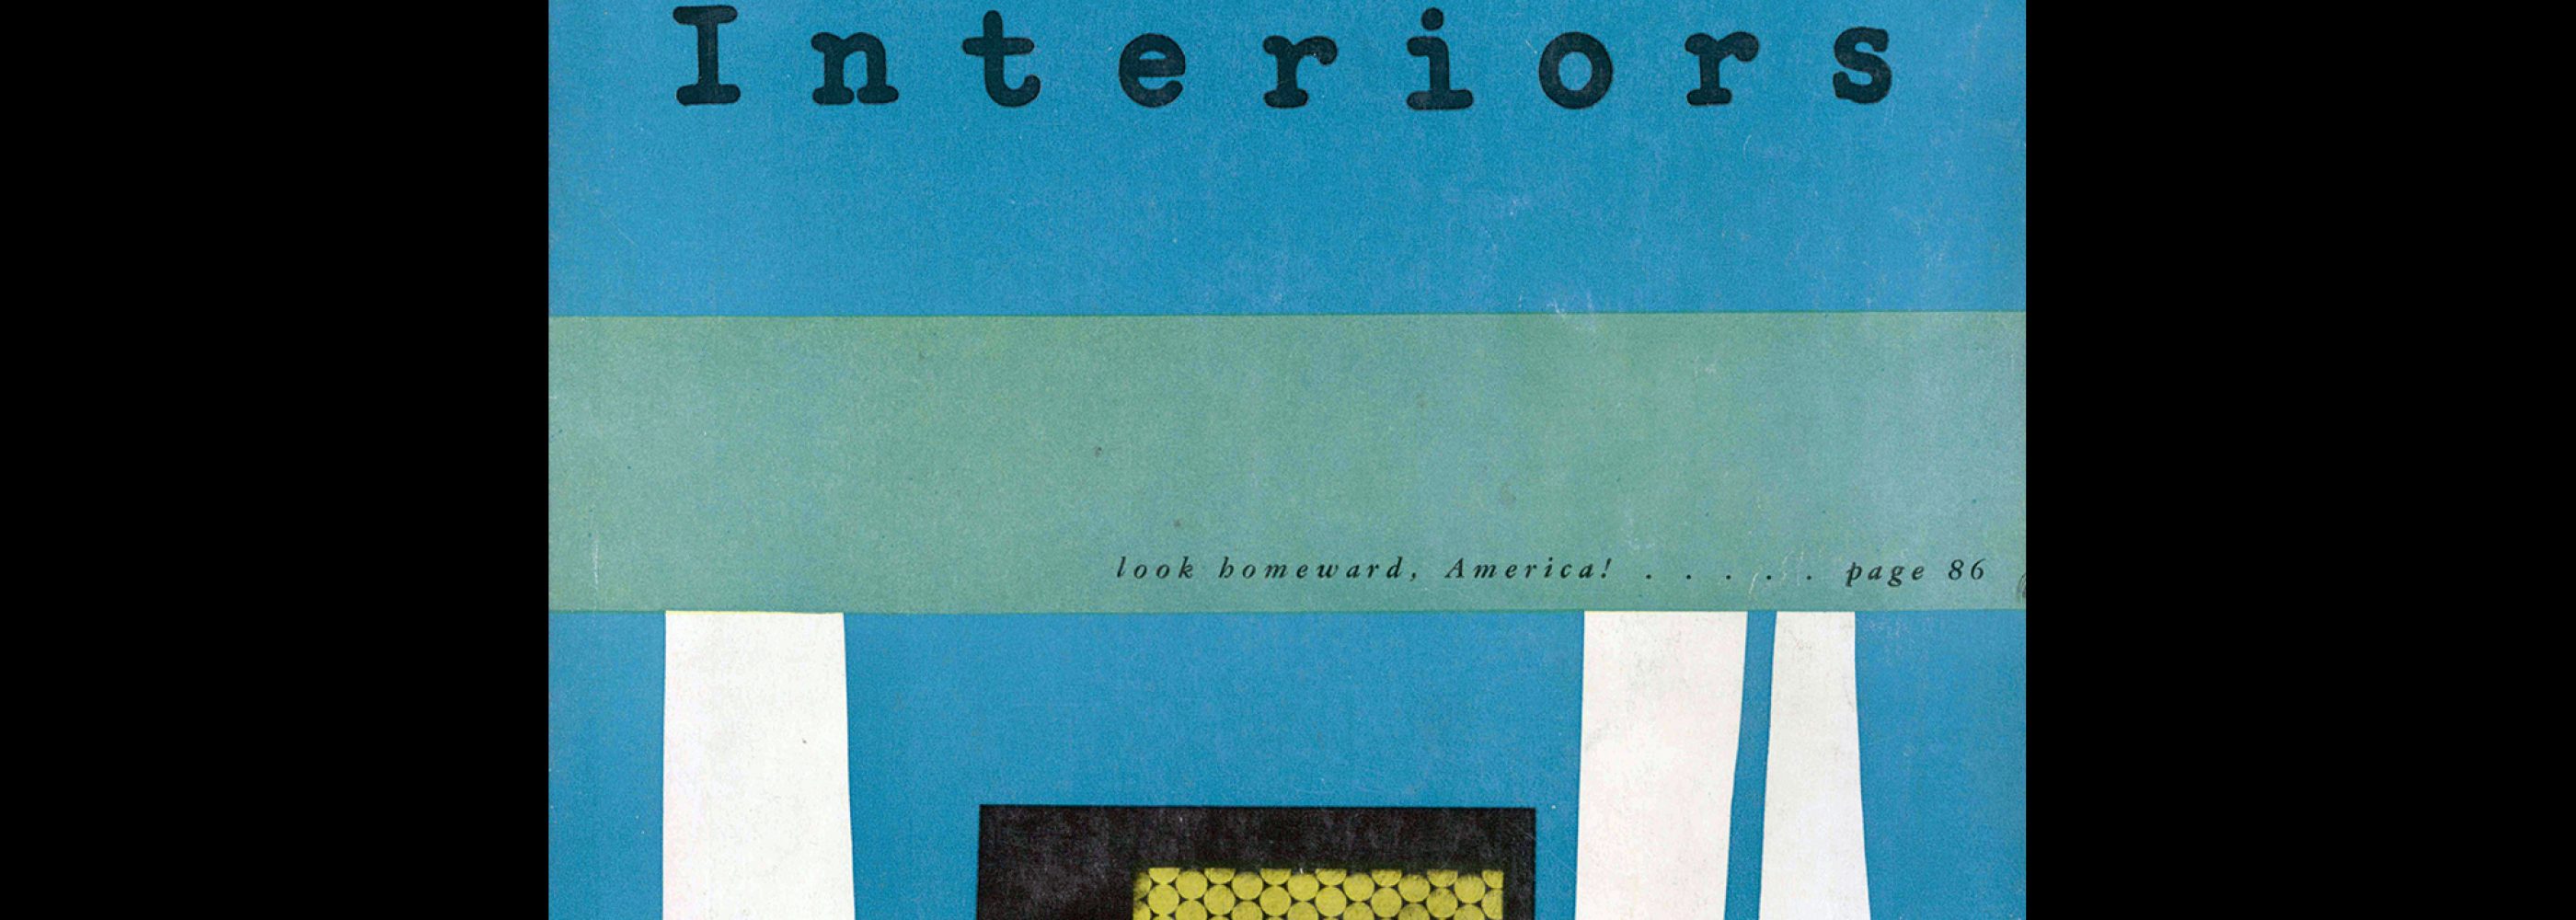 Interiors, February 1955. Cover design by Harold Krisel